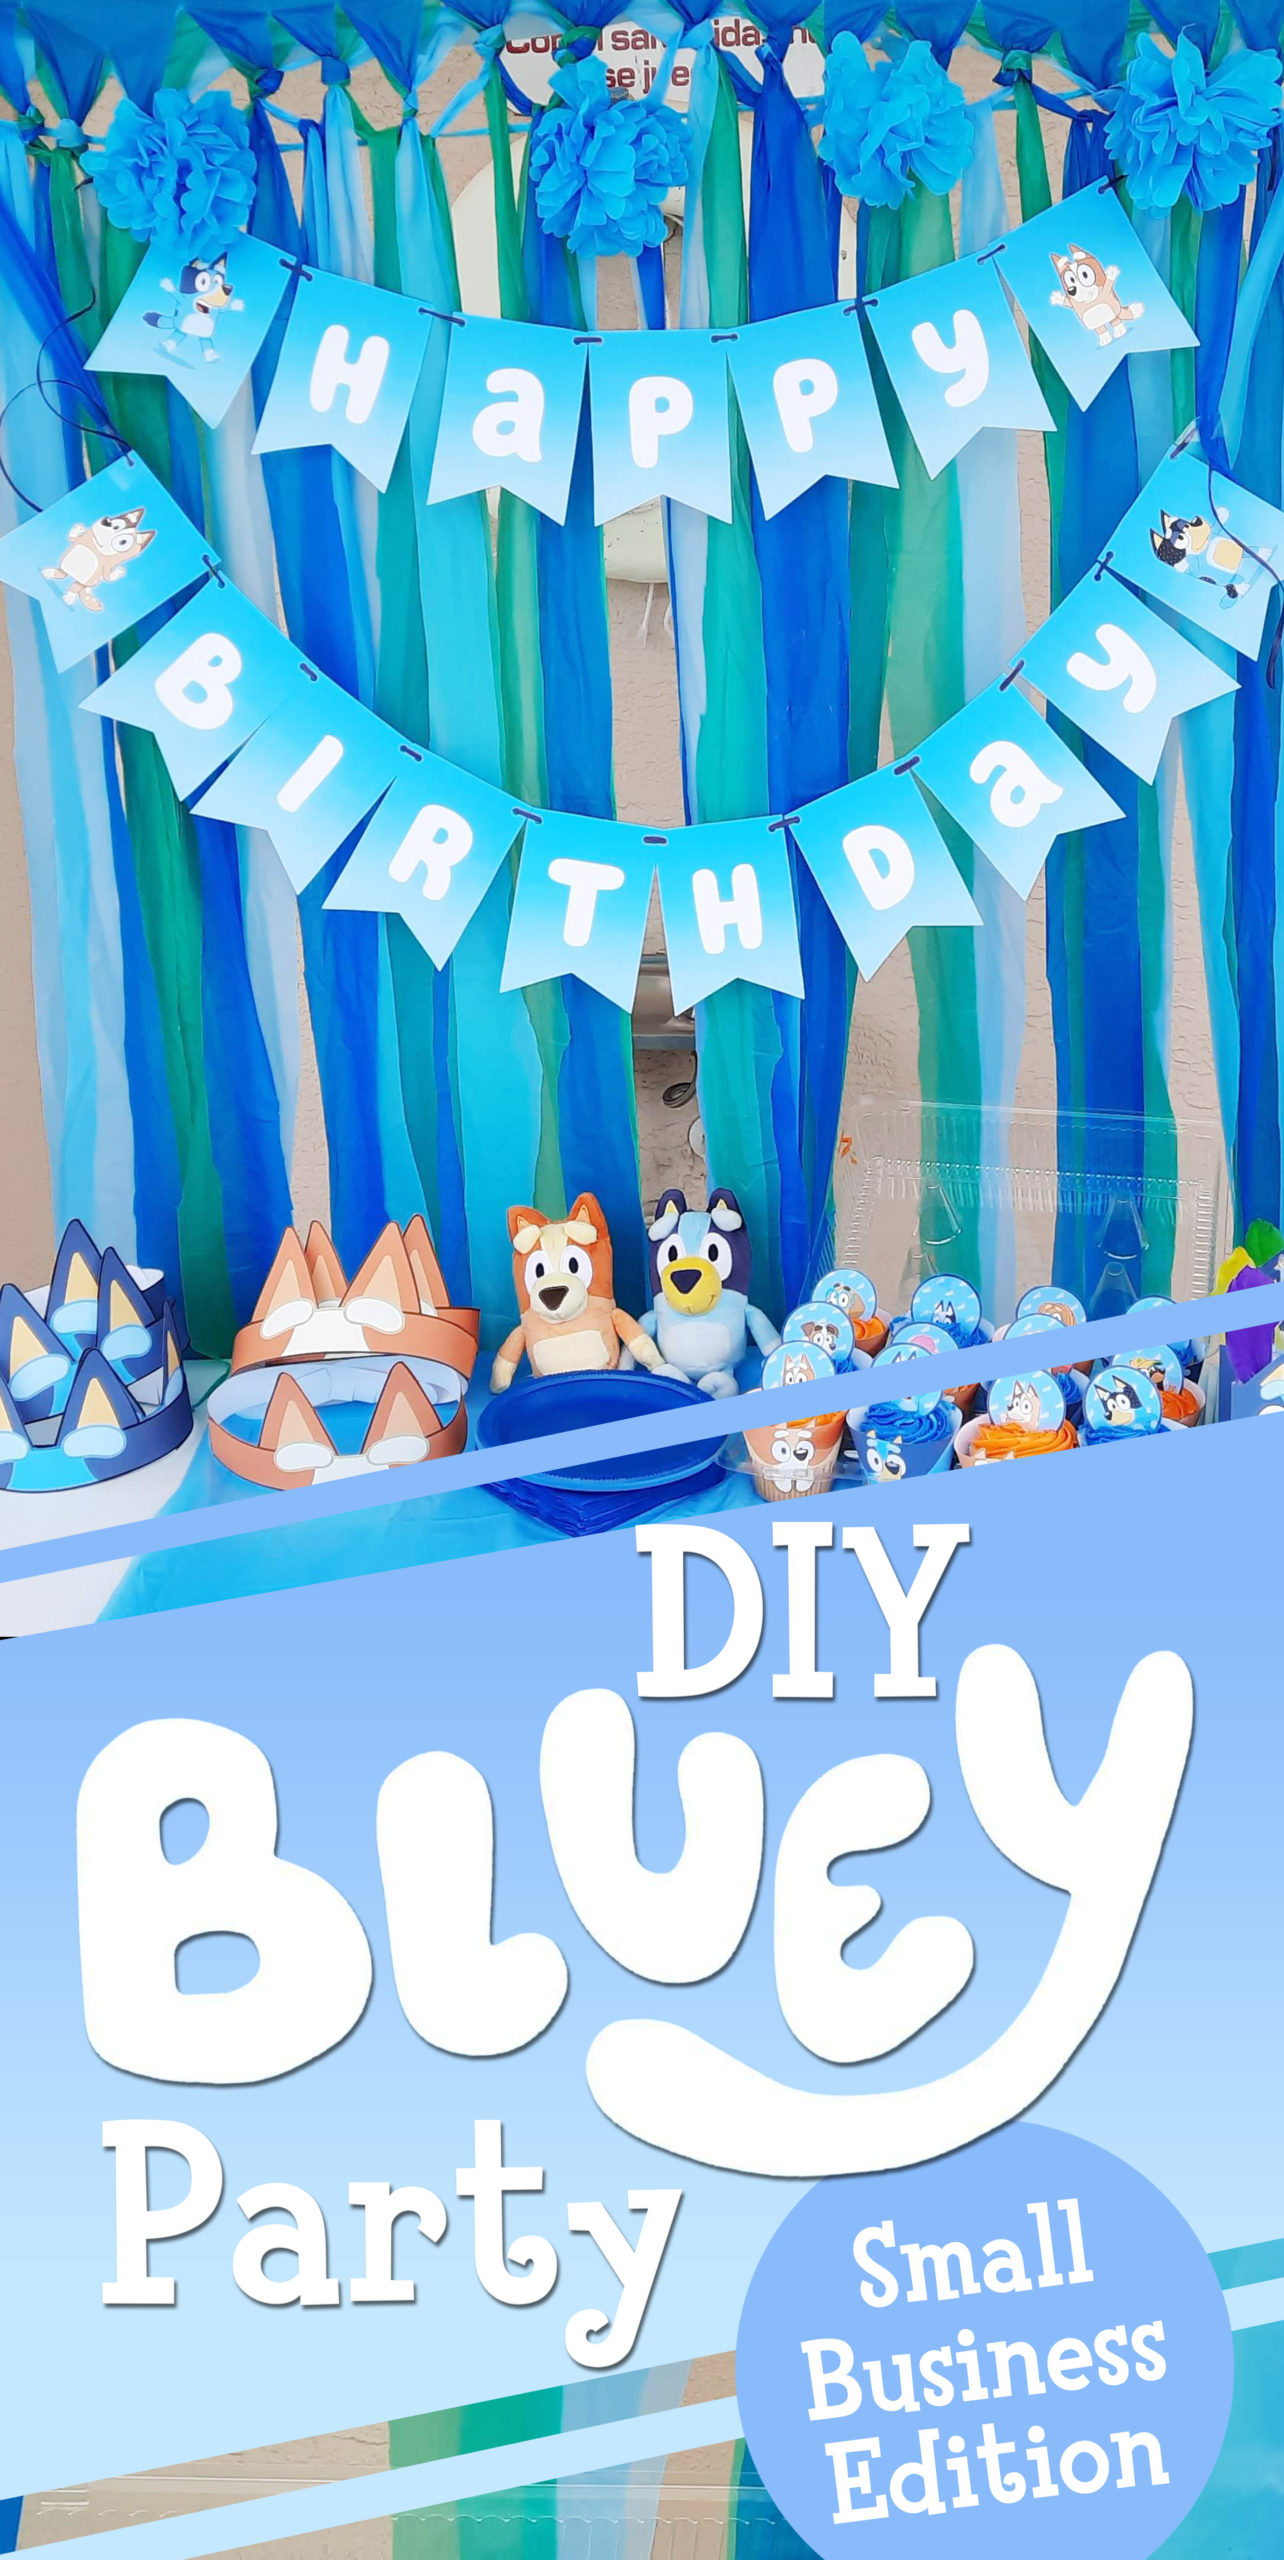 Make your very own Bluey and Bingo Balloons at home with this fun